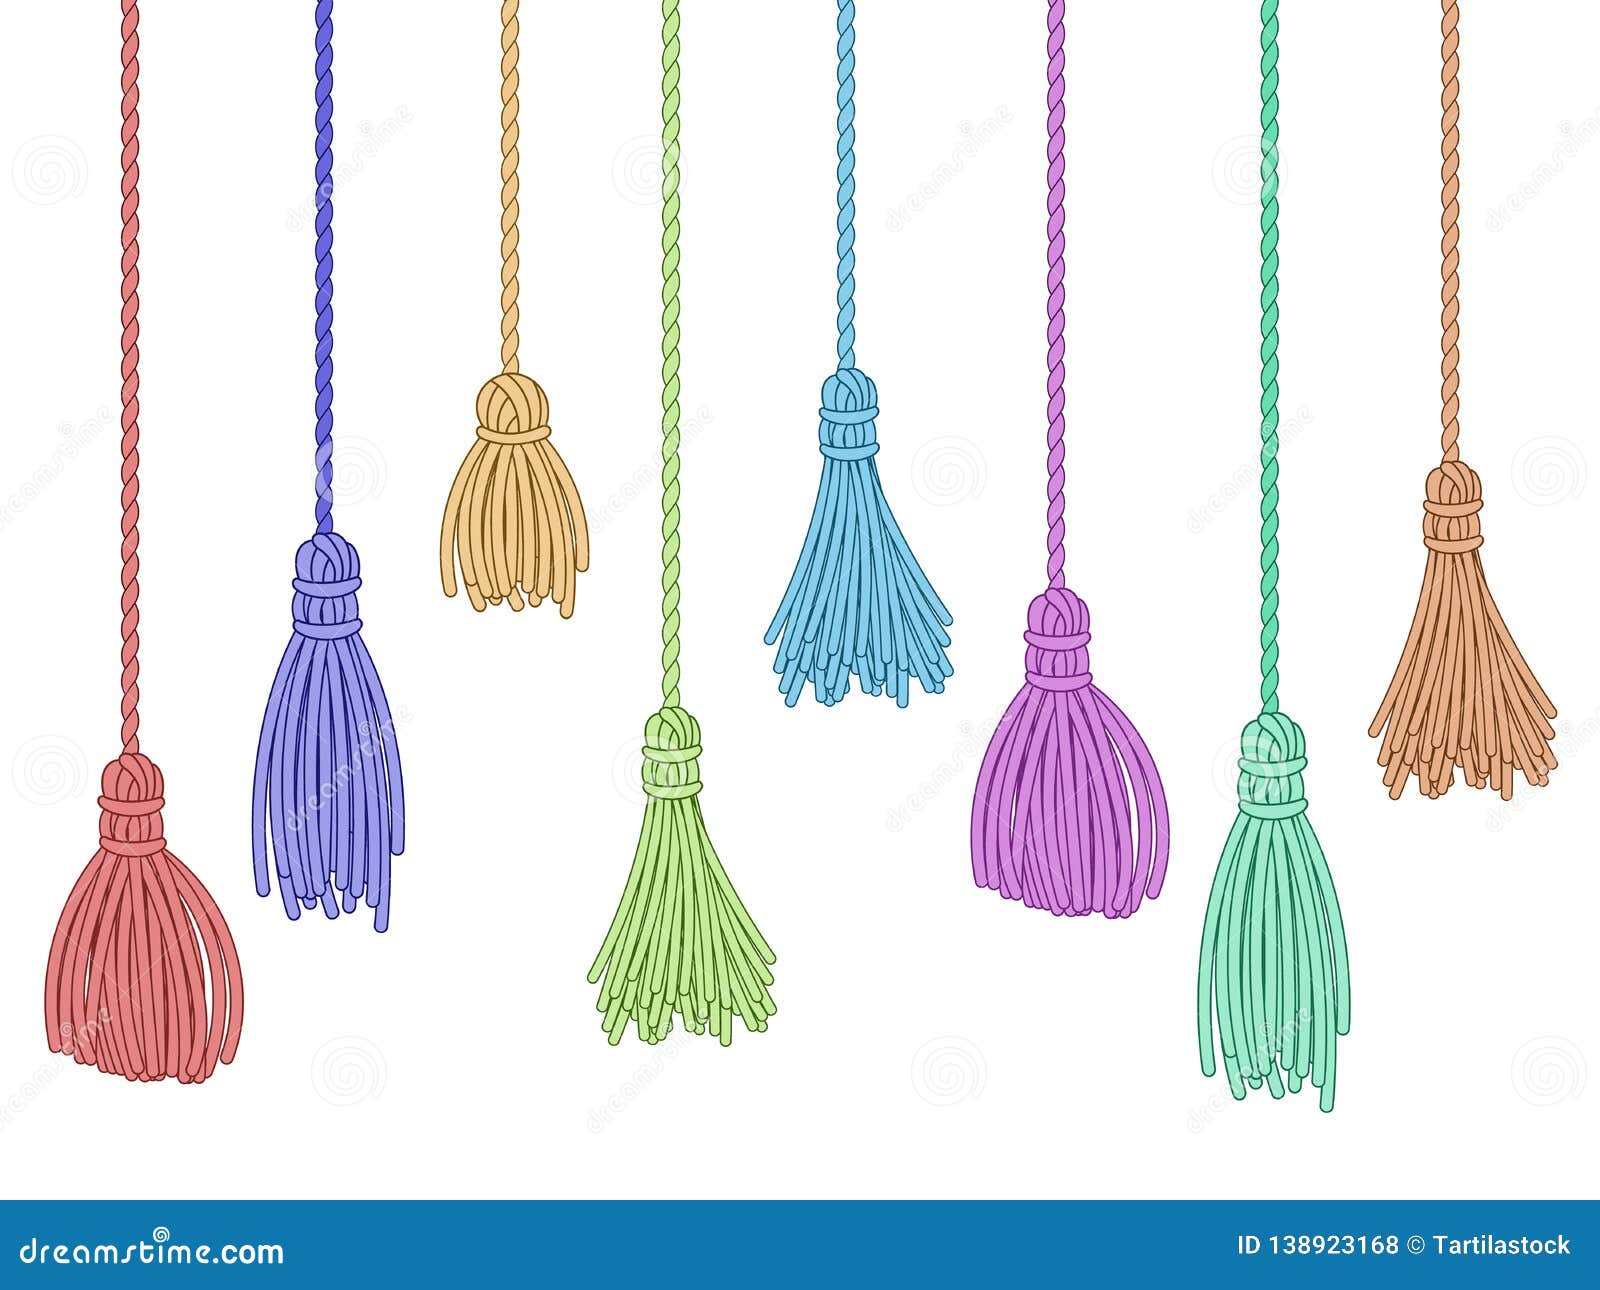 tassel trim. fabric curtain tassels, fringe bunch on rope and pillow colorful embelishments   set